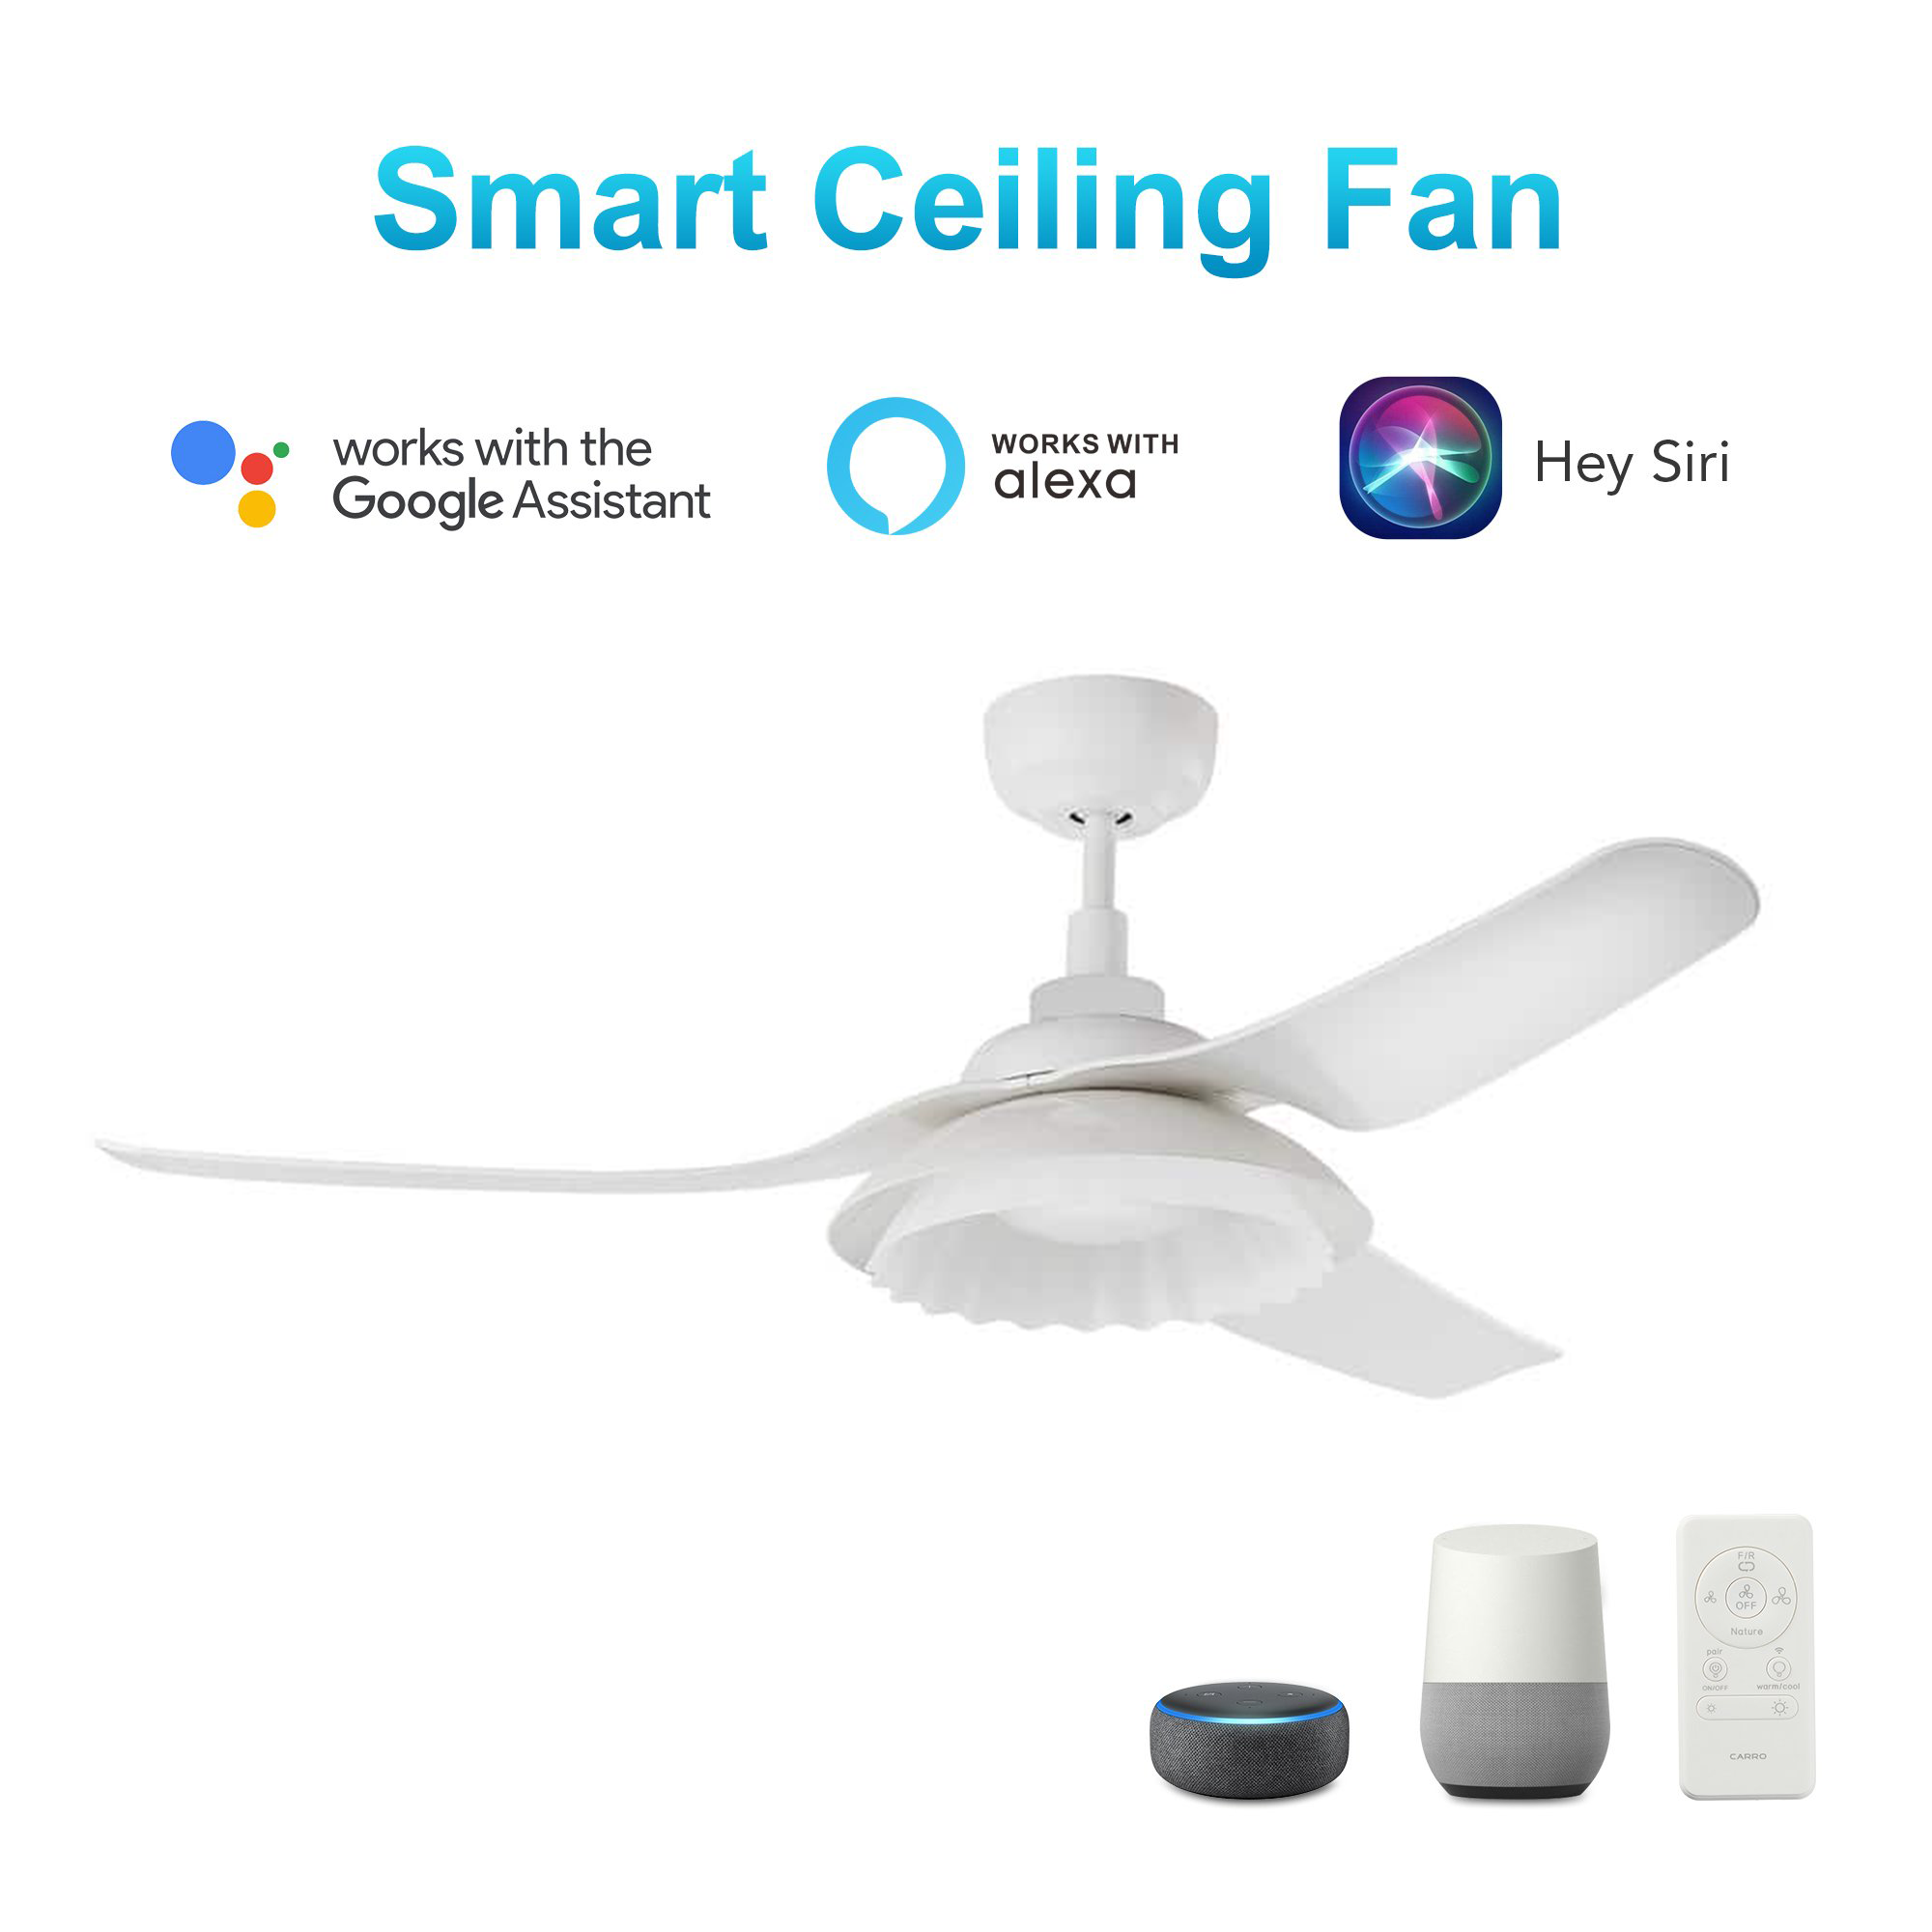 Daisy 52" In. White/White 3 Blade Smart Ceiling Fan with Dimmable LED Light Kit Works with Remote Control, Wi-Fi apps and Voice control via Google Assistant/Alexa/Siri